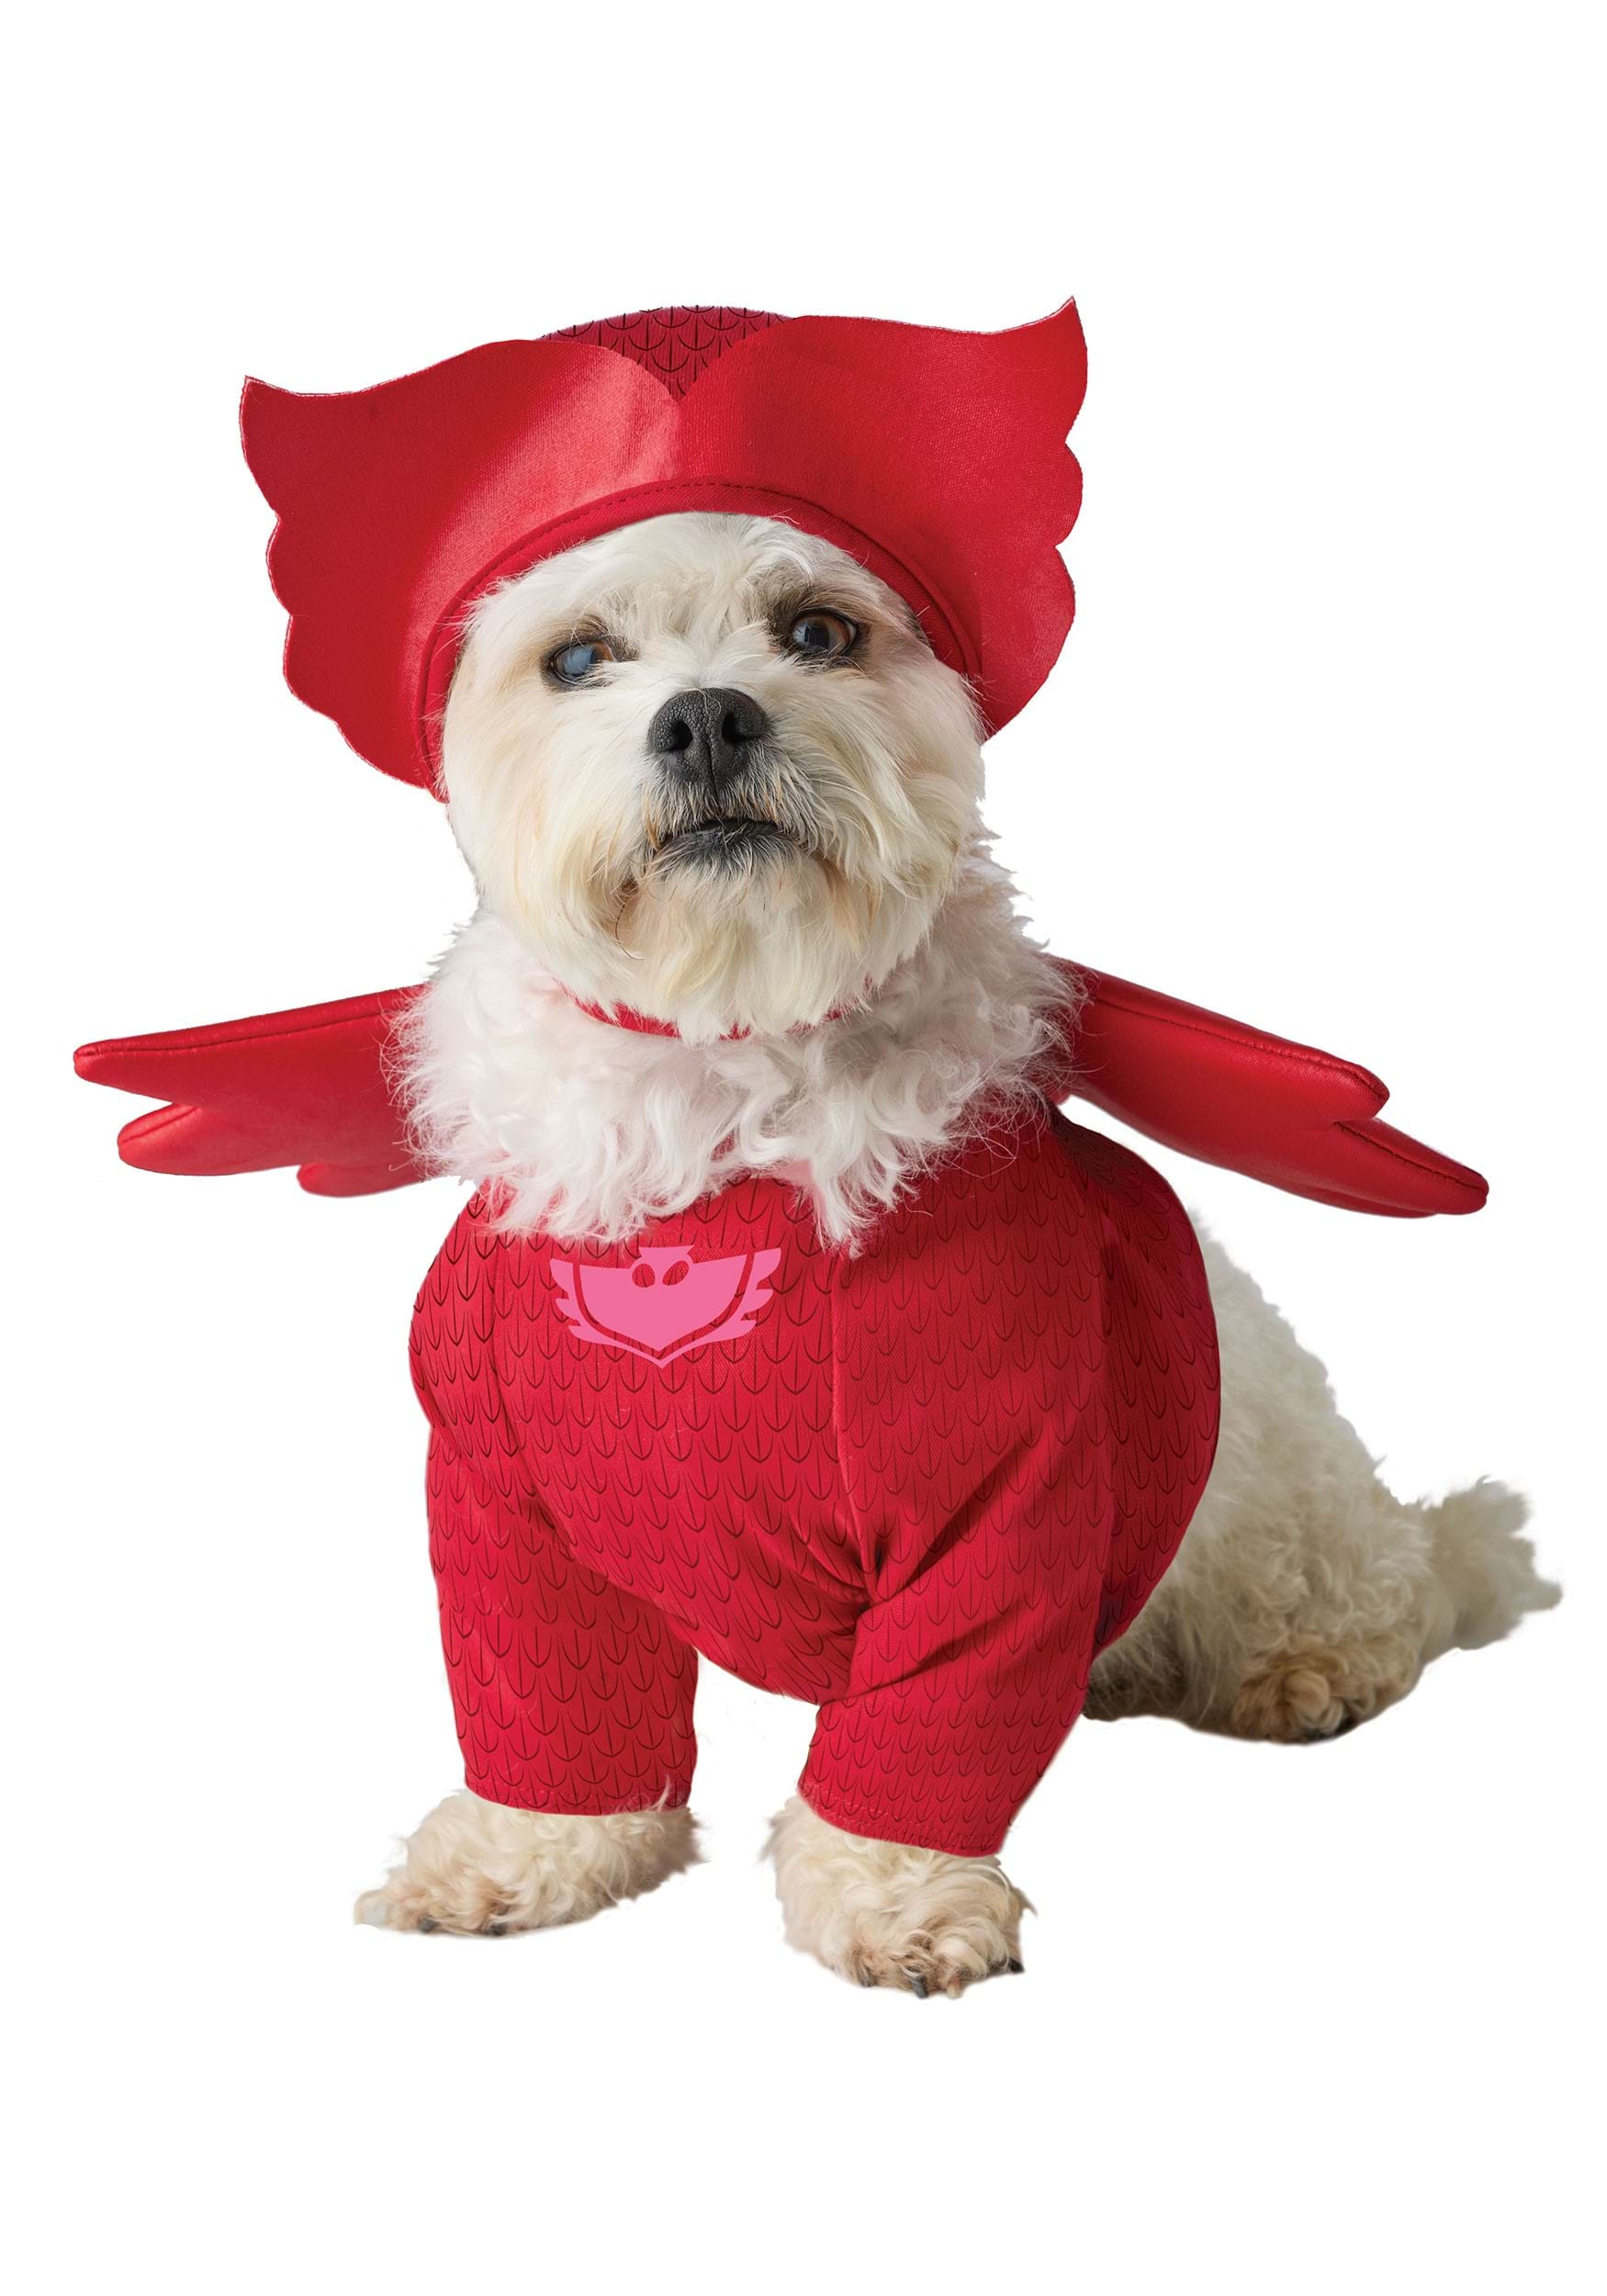 Photos - Fancy Dress California Costume Collection PJ Masks Owlette Pet Costume | Costumes for 